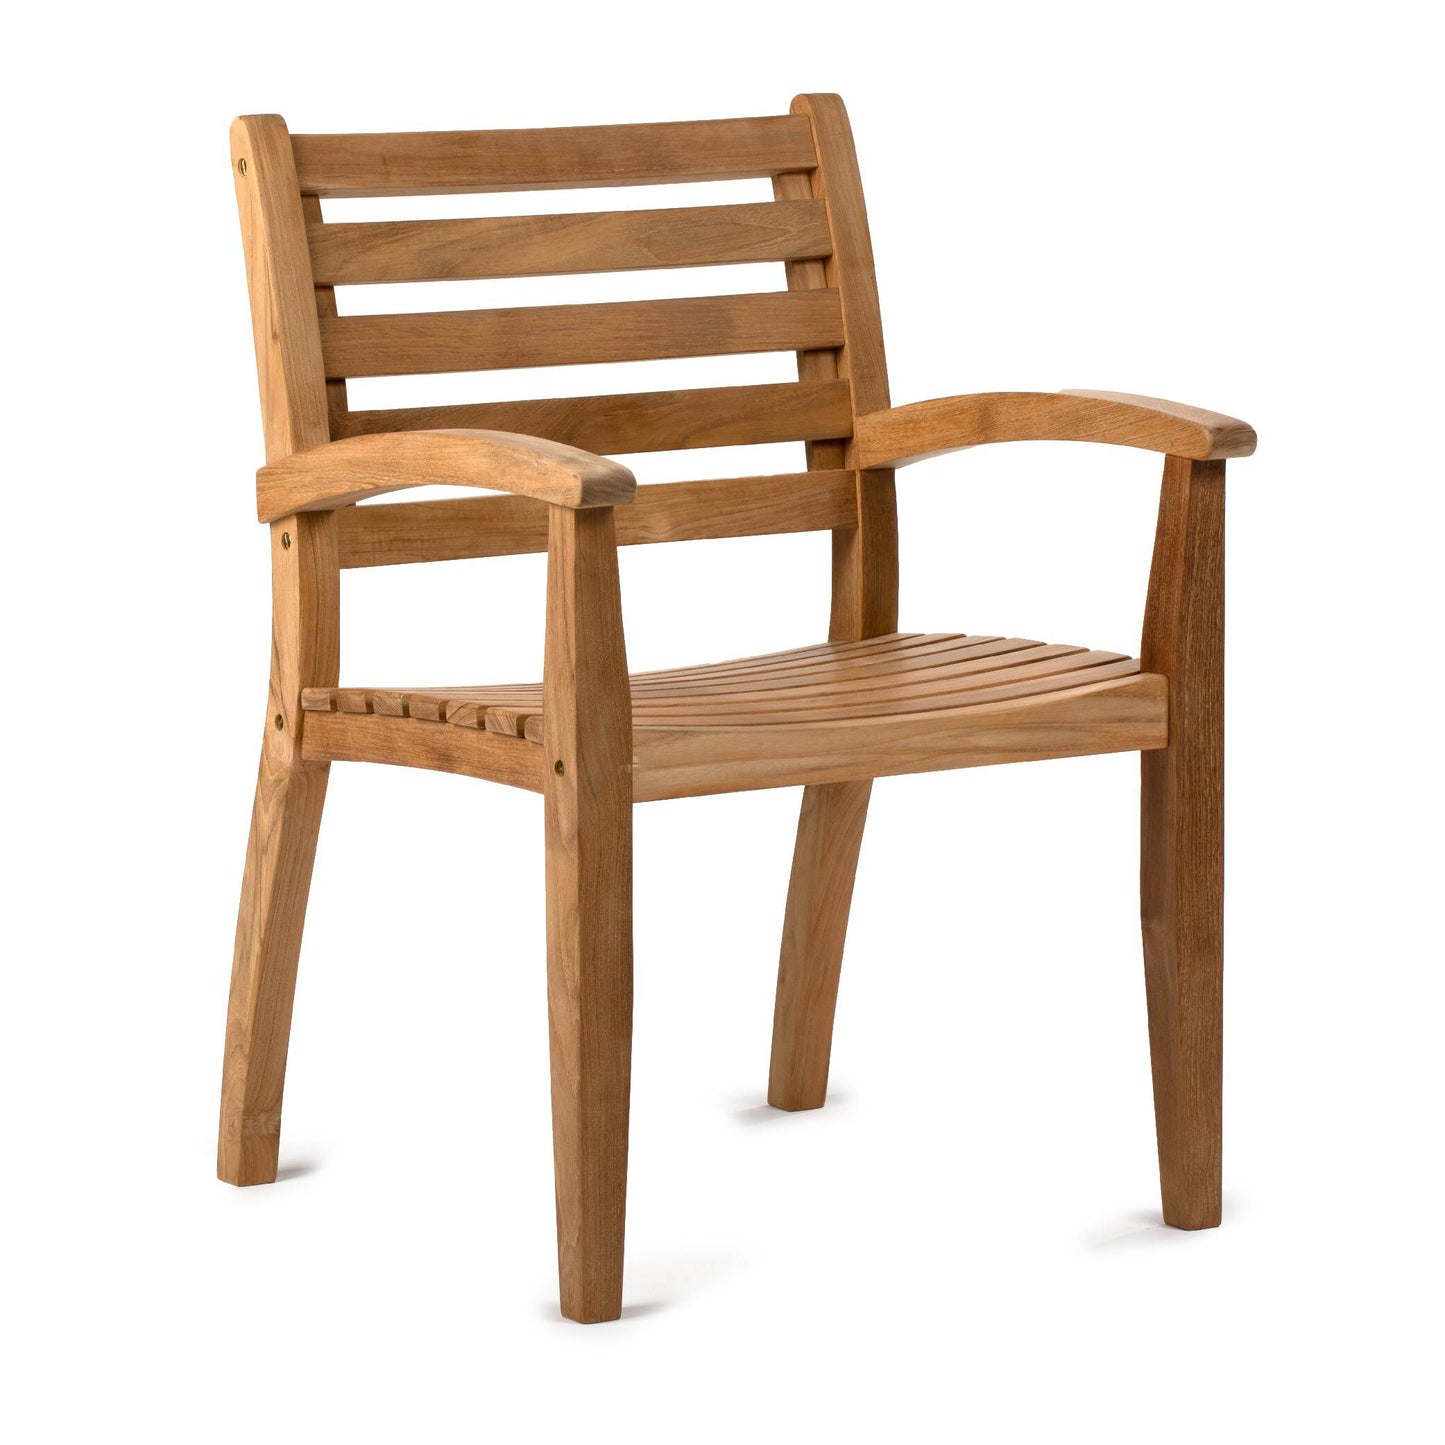 Sandhill Grade A Teak Dining Chair with Optional Arms - Optional Arms: Include Arms | Include Arms - view 9